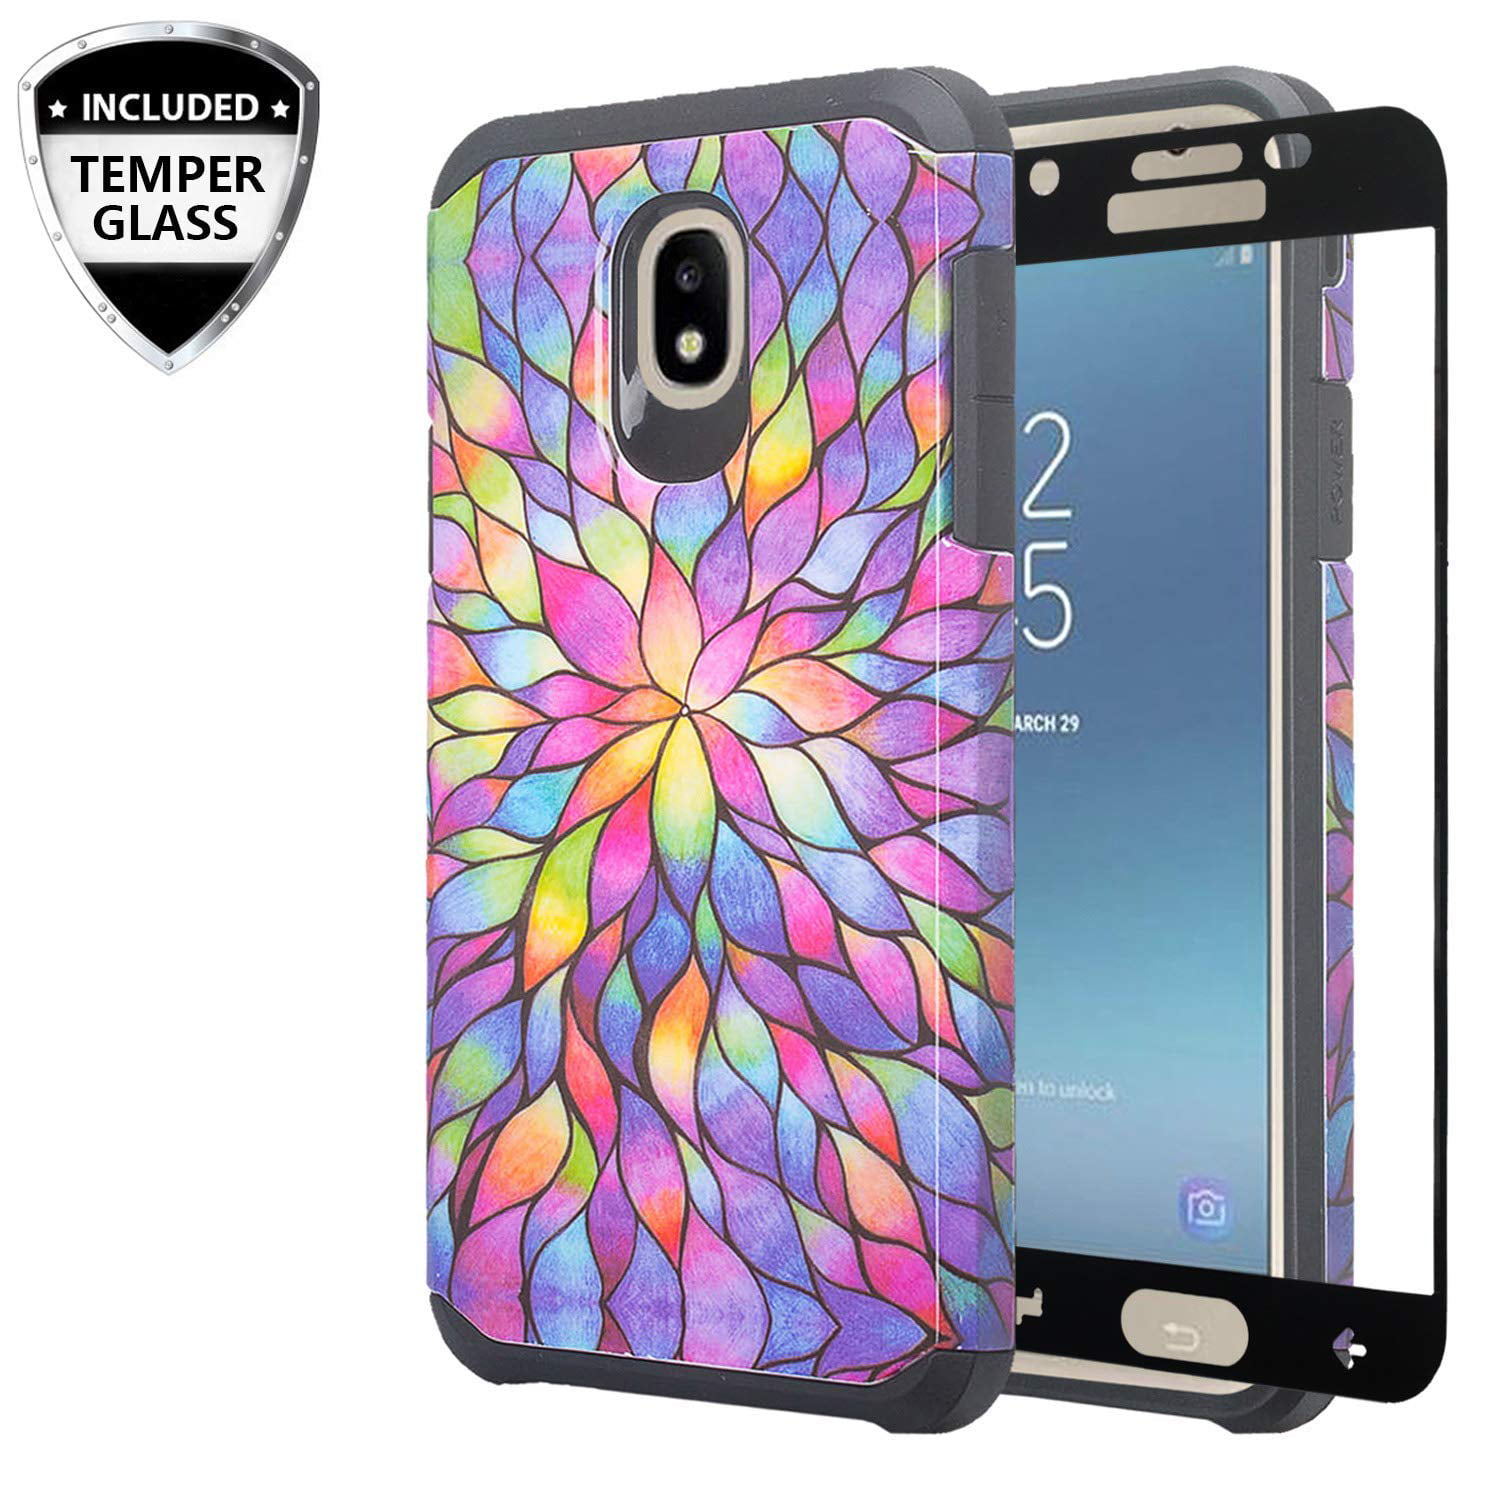 for Samsung Galaxy J7 2018 Case,Galaxy J7 Star Case,Galaxy J7 Refine Case,Galaxy J7 V 2nd Gen Case,Galaxy J7 Aura Case with Screen Protector,Mandala Floral Flower PU Leather Flip Phone Cover,Mint 